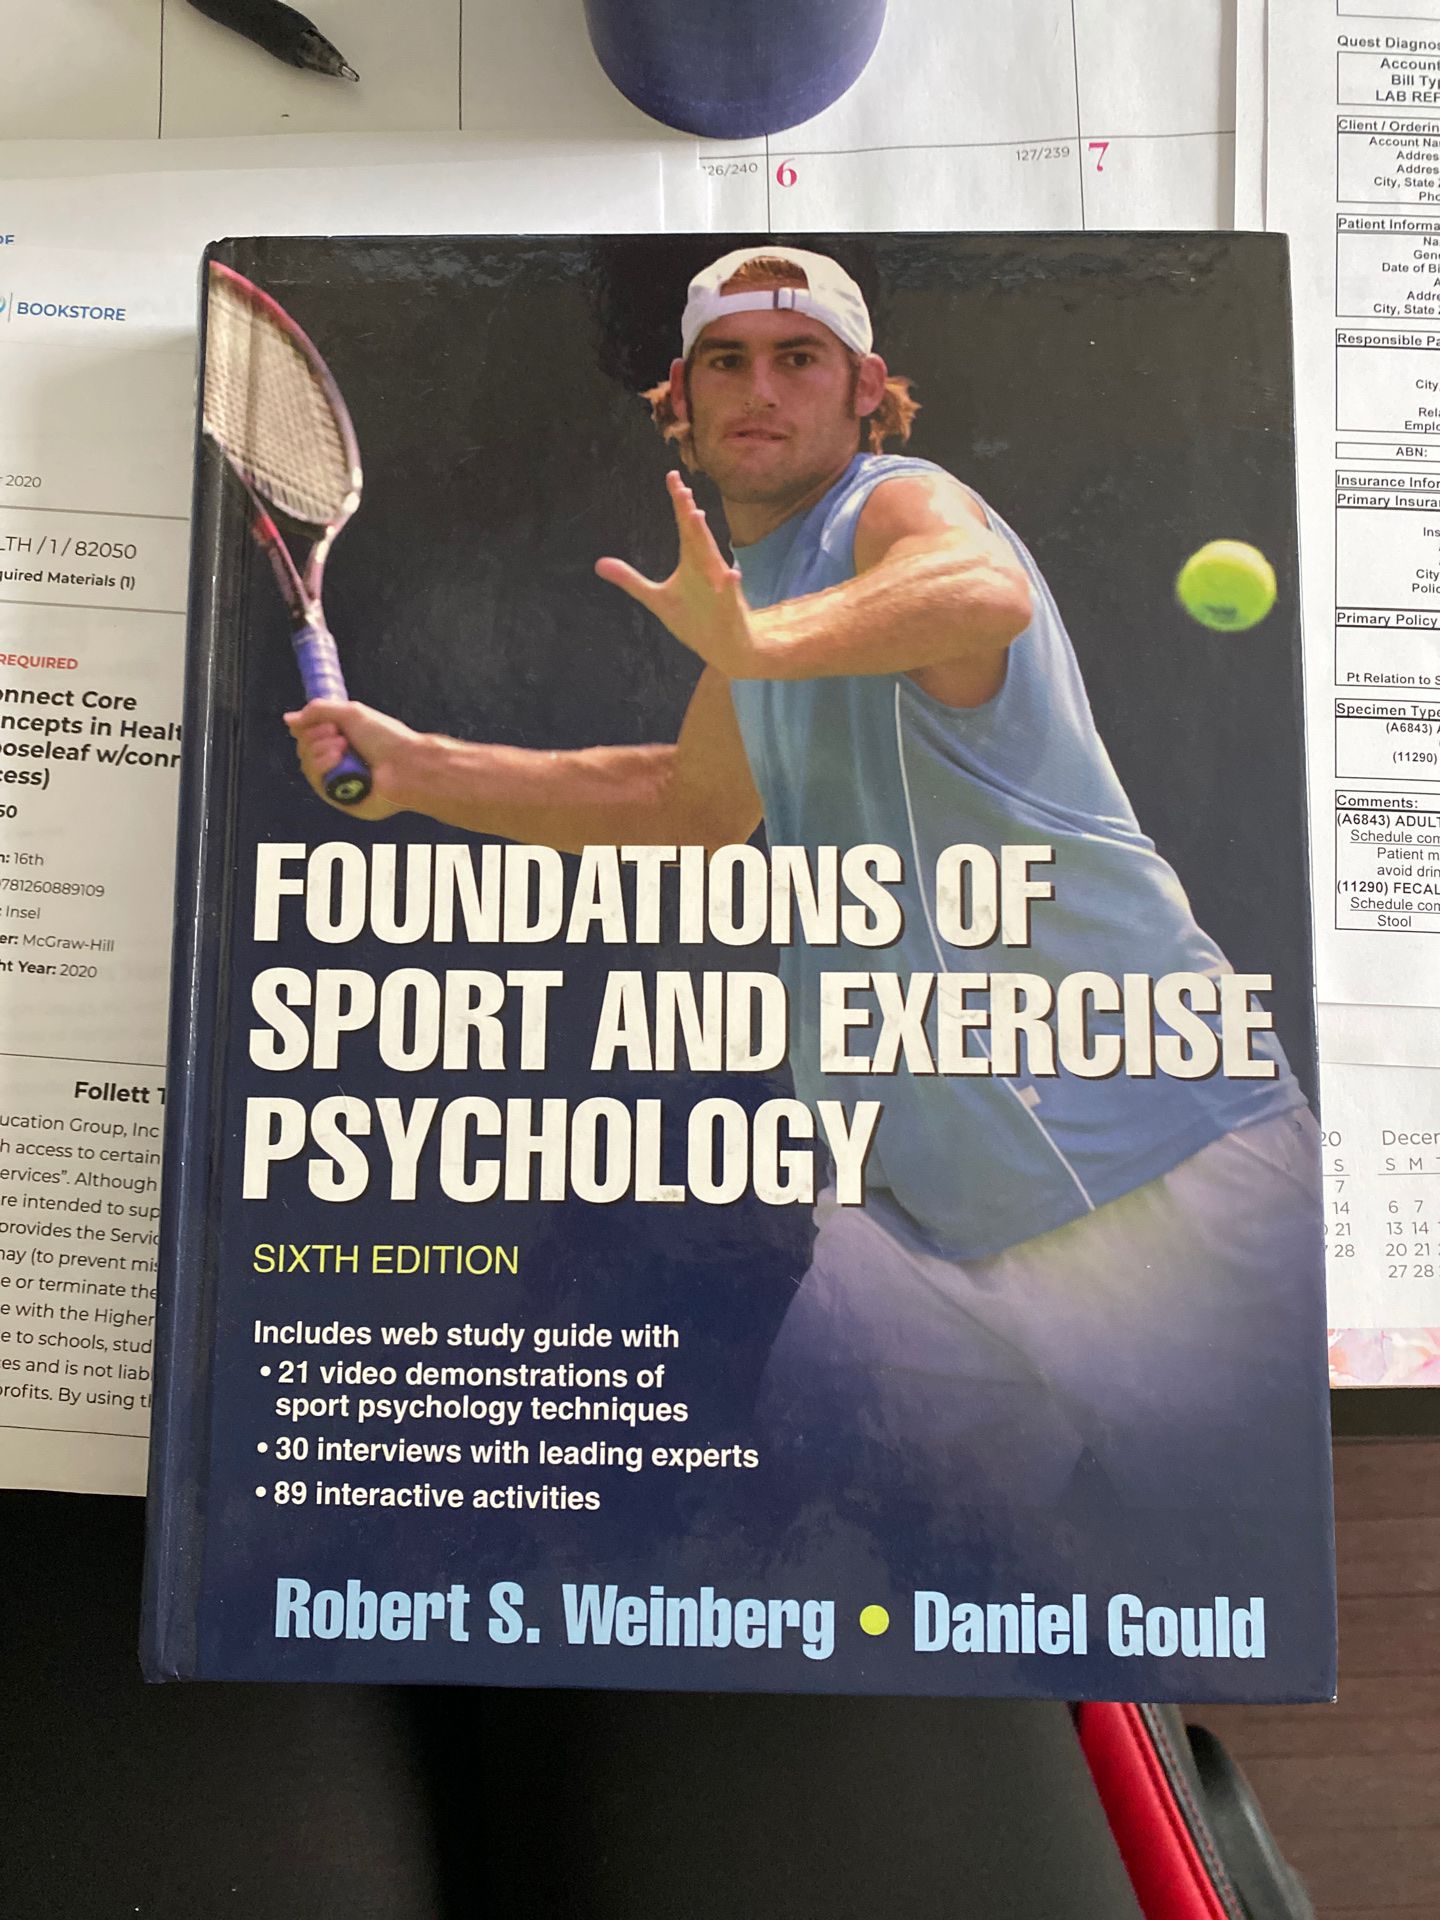 Foundation of Sport and Exercise Psychology